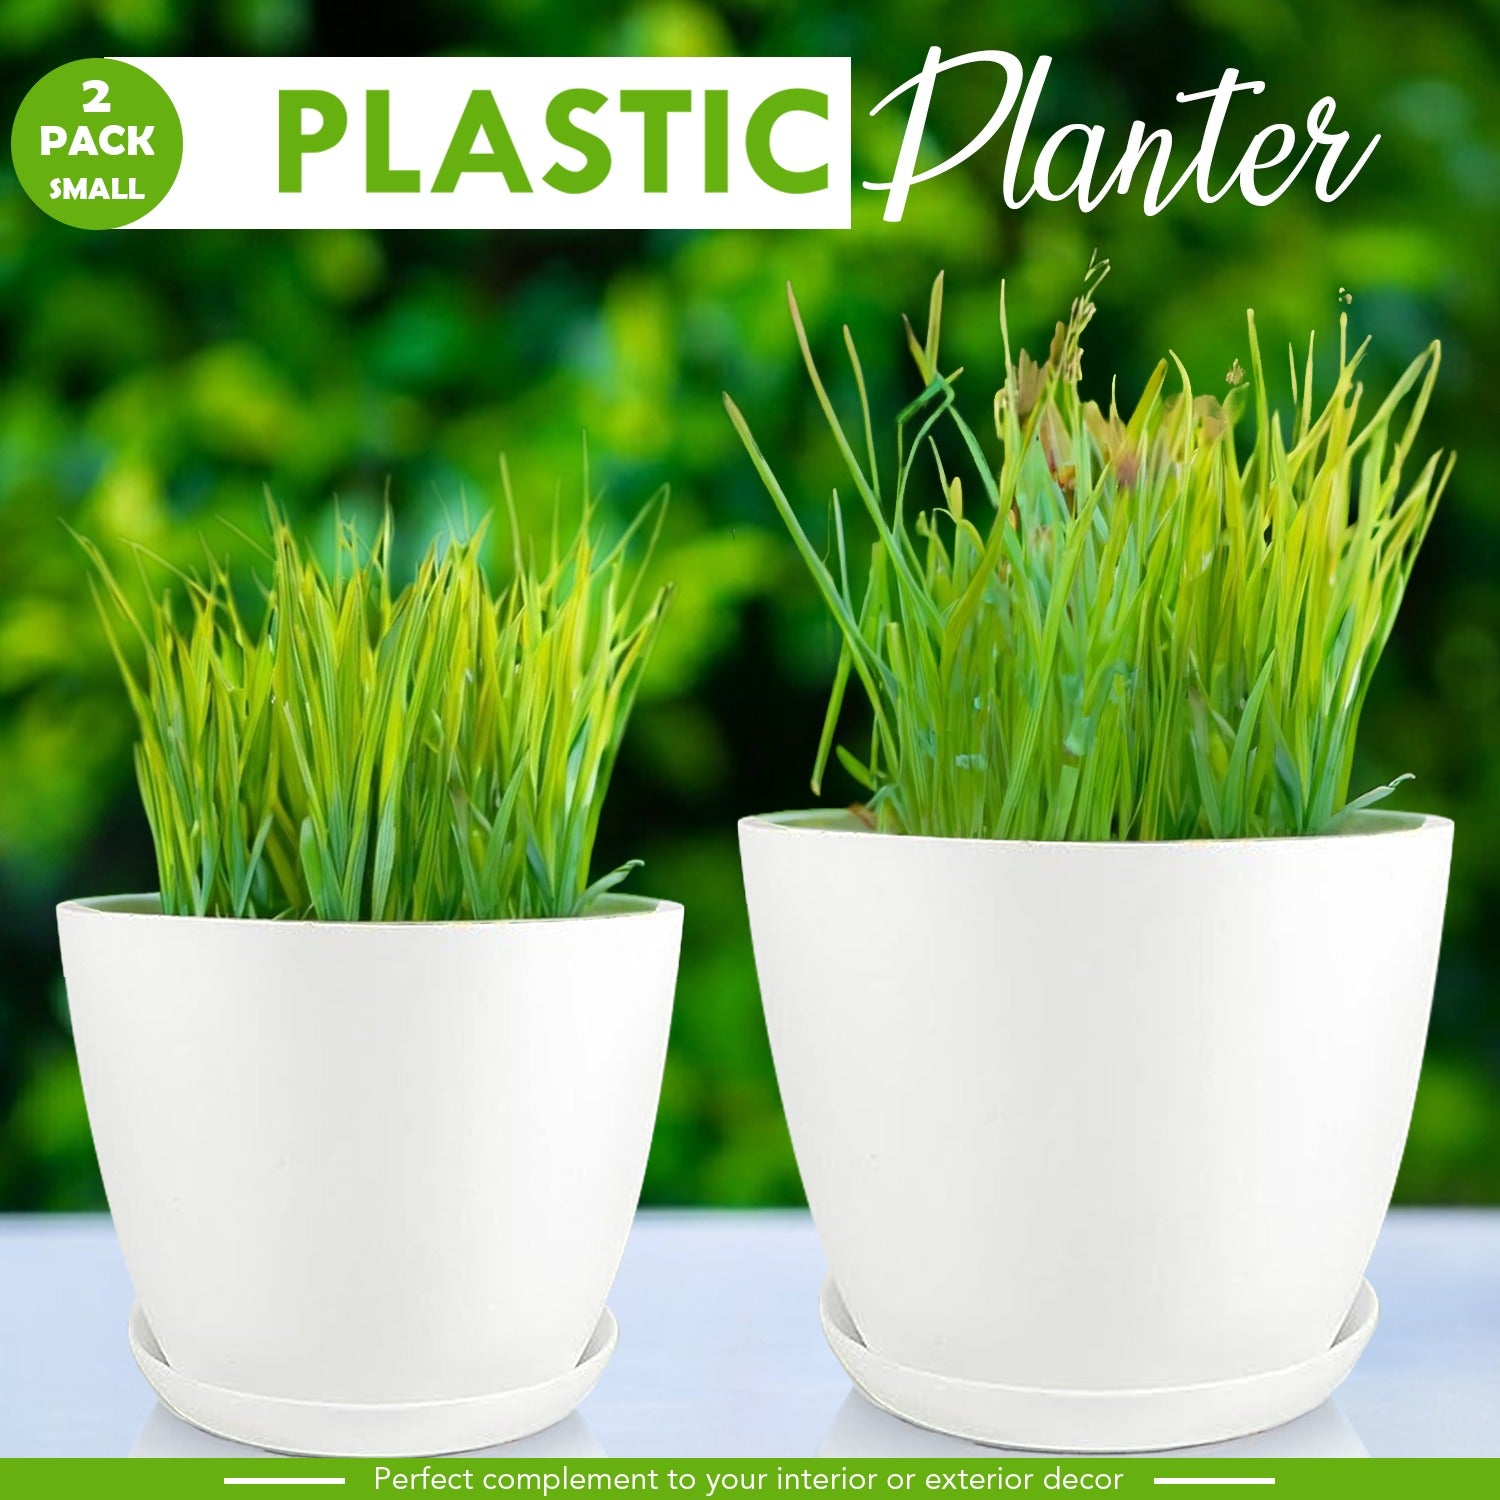 Decorative Flower Pots with Drainage - Set of 2 Plastic Planters for Indoor Plants Fast Forward